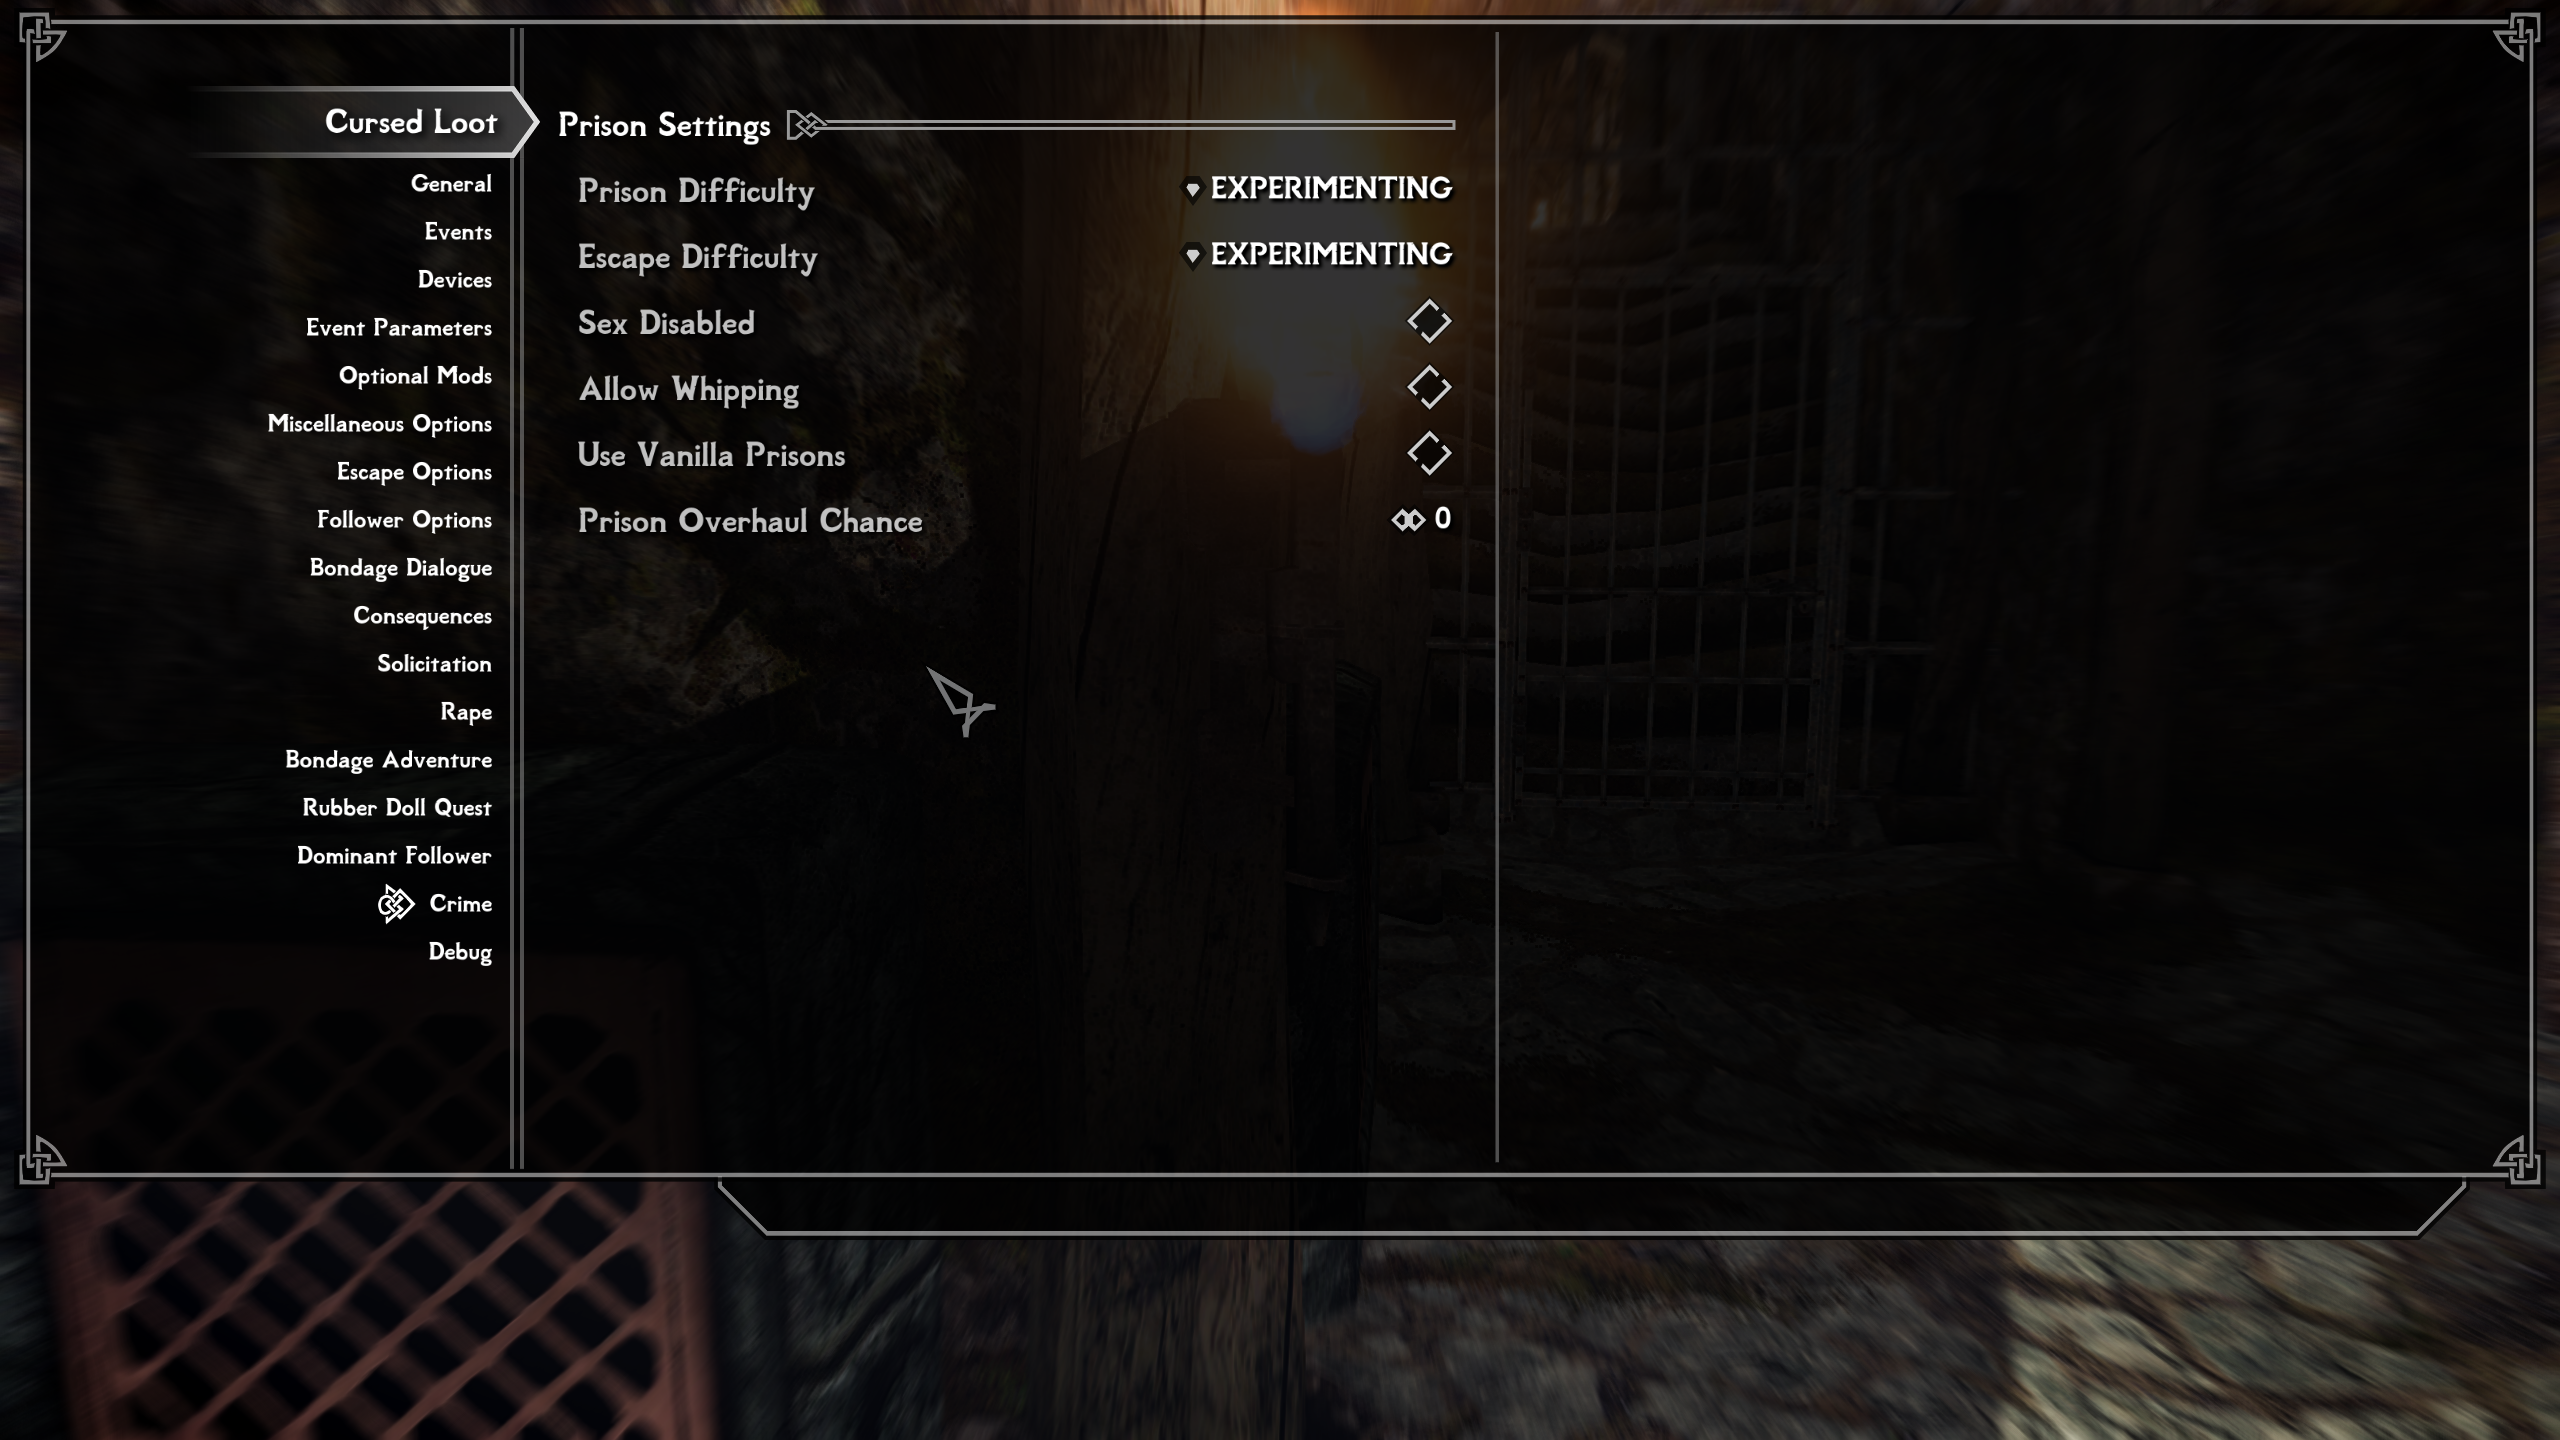 deviously cursed loot se beta 2 page 3 downloads skyrim special.